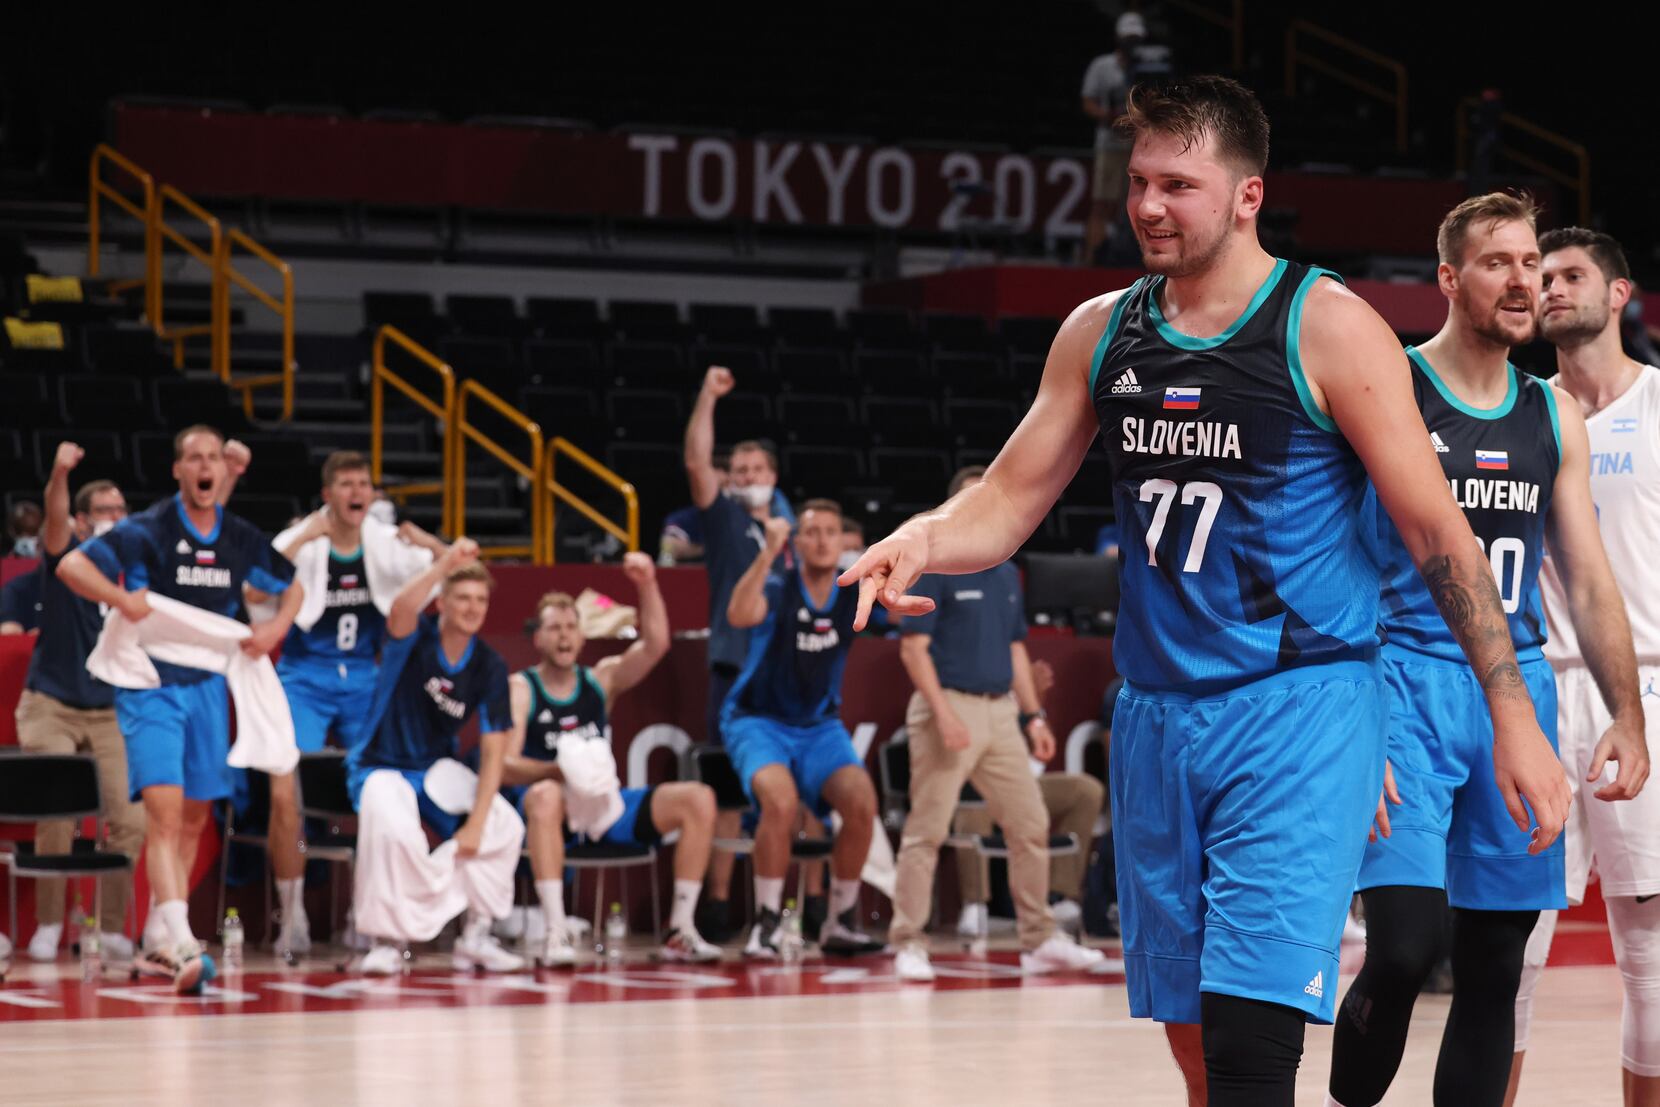 2020 Olympics: Japan MBB loses 116-81 to Slovenia - Bullets Forever